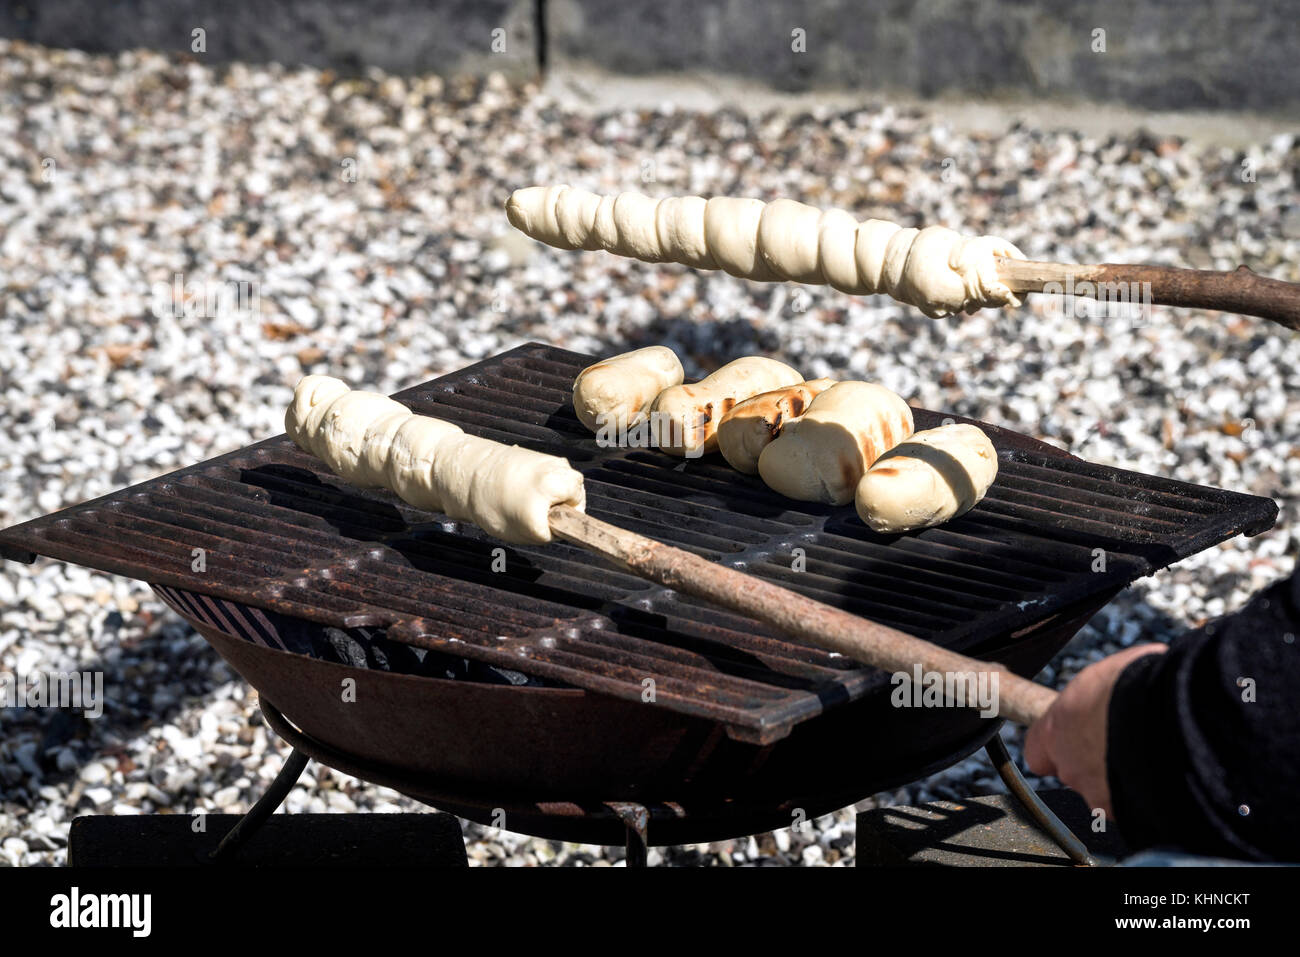 Bread on an outdoor grill with raw dough on a stick ready to be baked Stock Photo